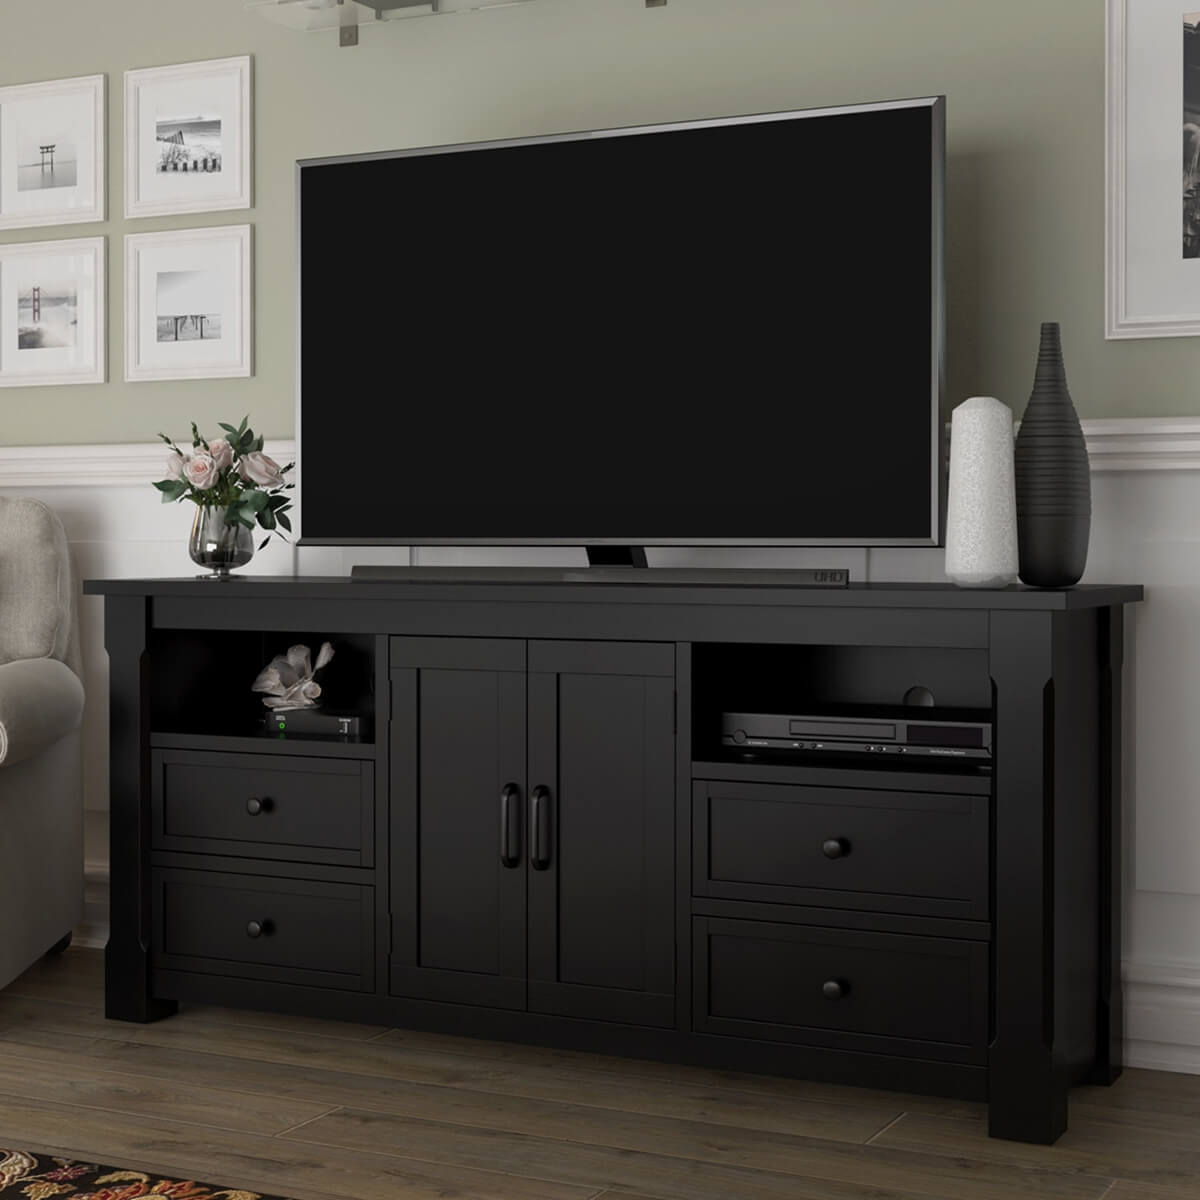 https://www.sierralivingconcepts.com/images/thumbs/0400525_brimson-contemporary-solid-wood-black-tv-media-cabinet-with-drawers.jpeg